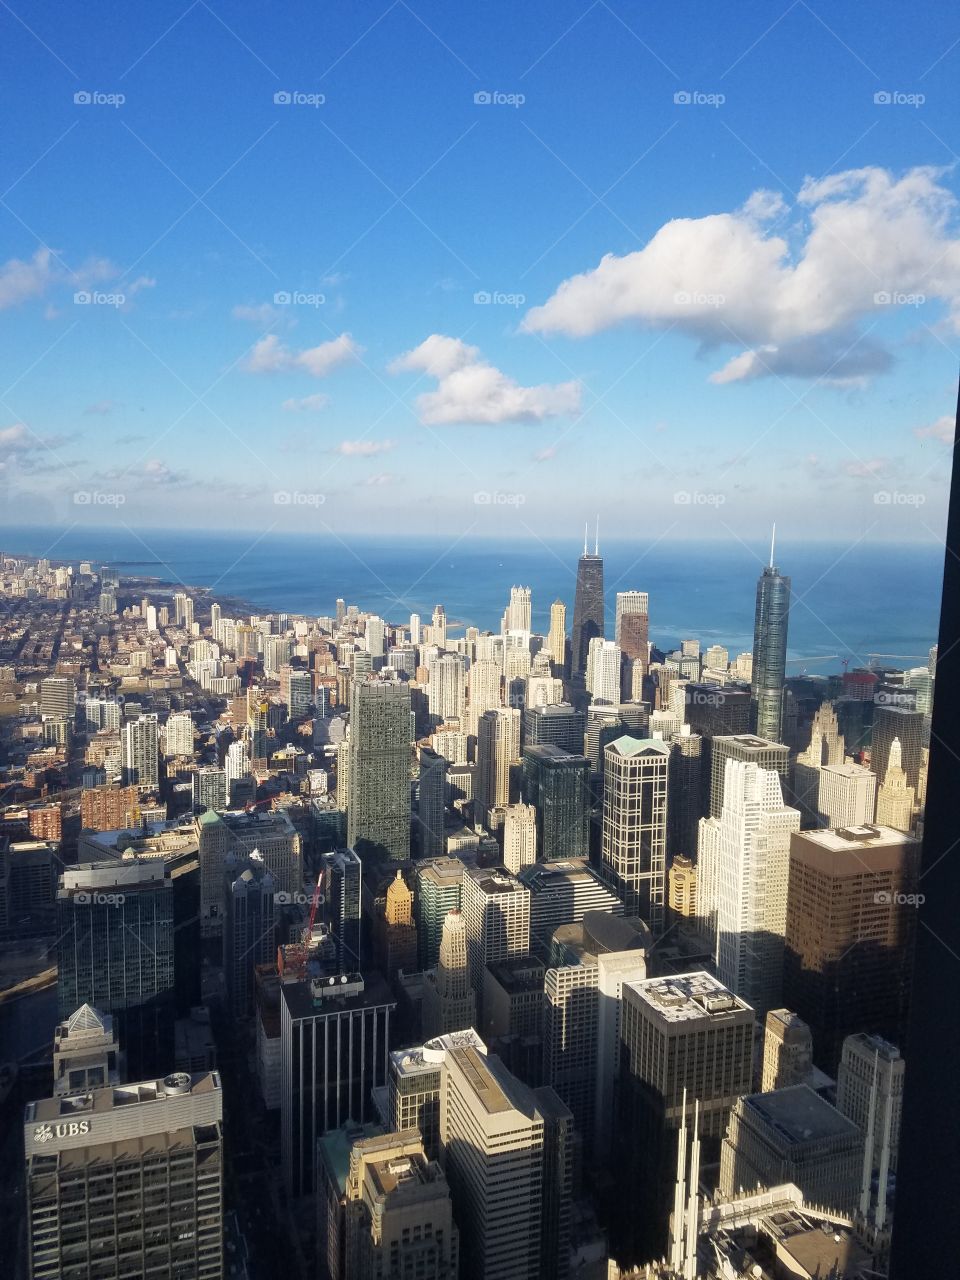 Bird's eye view of Chicago from 115 floors up.